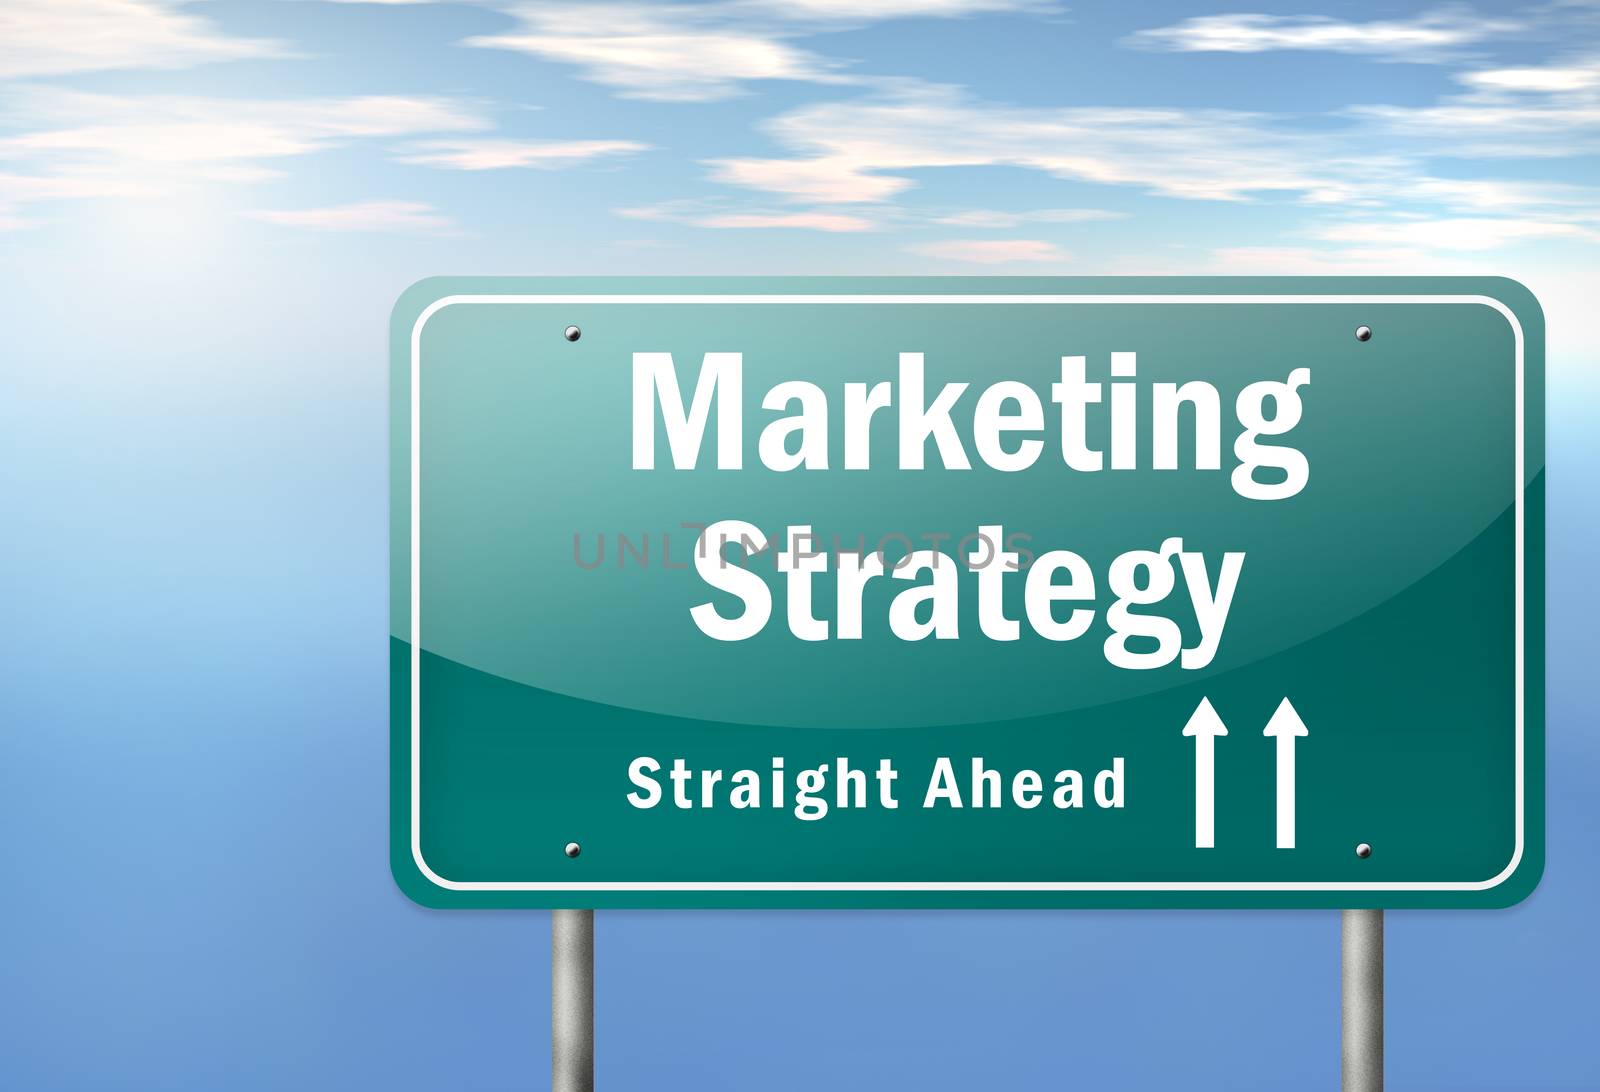 Highway Signpost Marketing Strategy by mindscanner